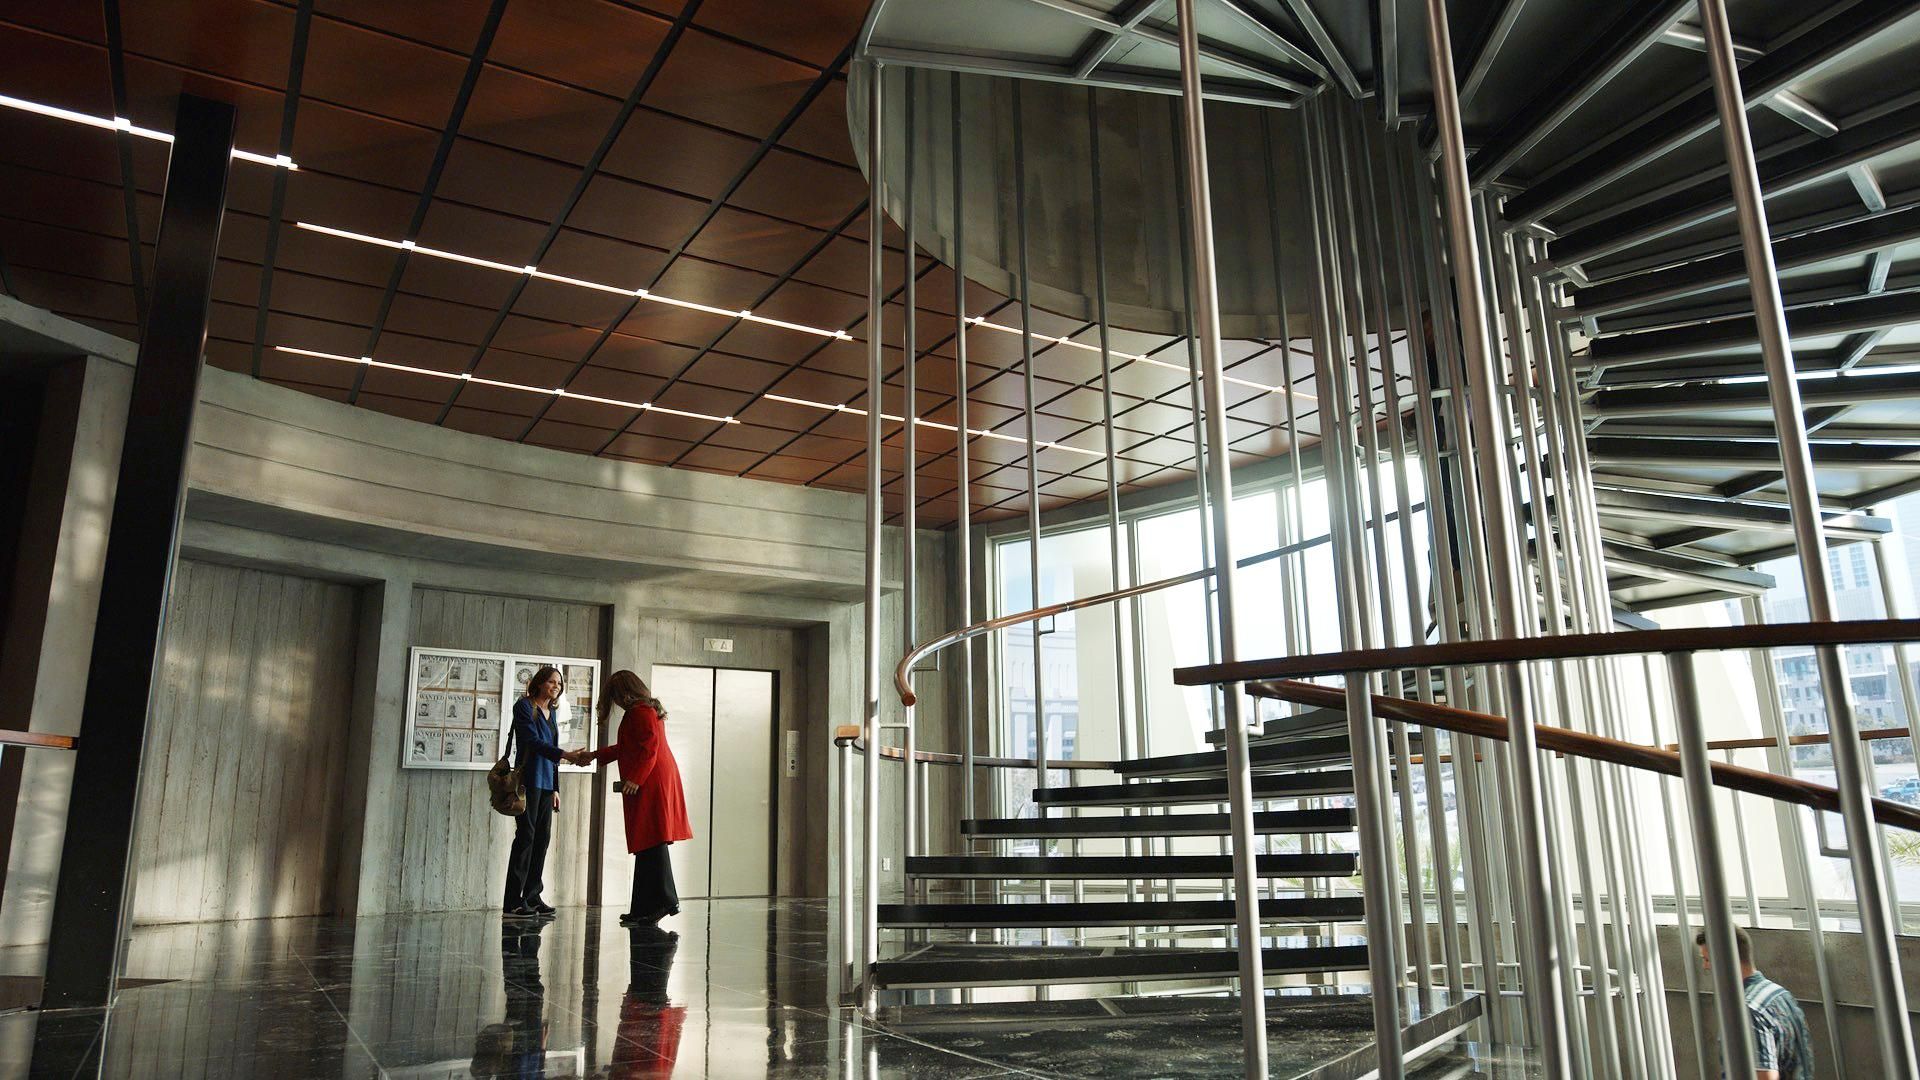 The polished metal DNA-helix-inspired spiral staircase that is a feature of the CSI: Vegas set